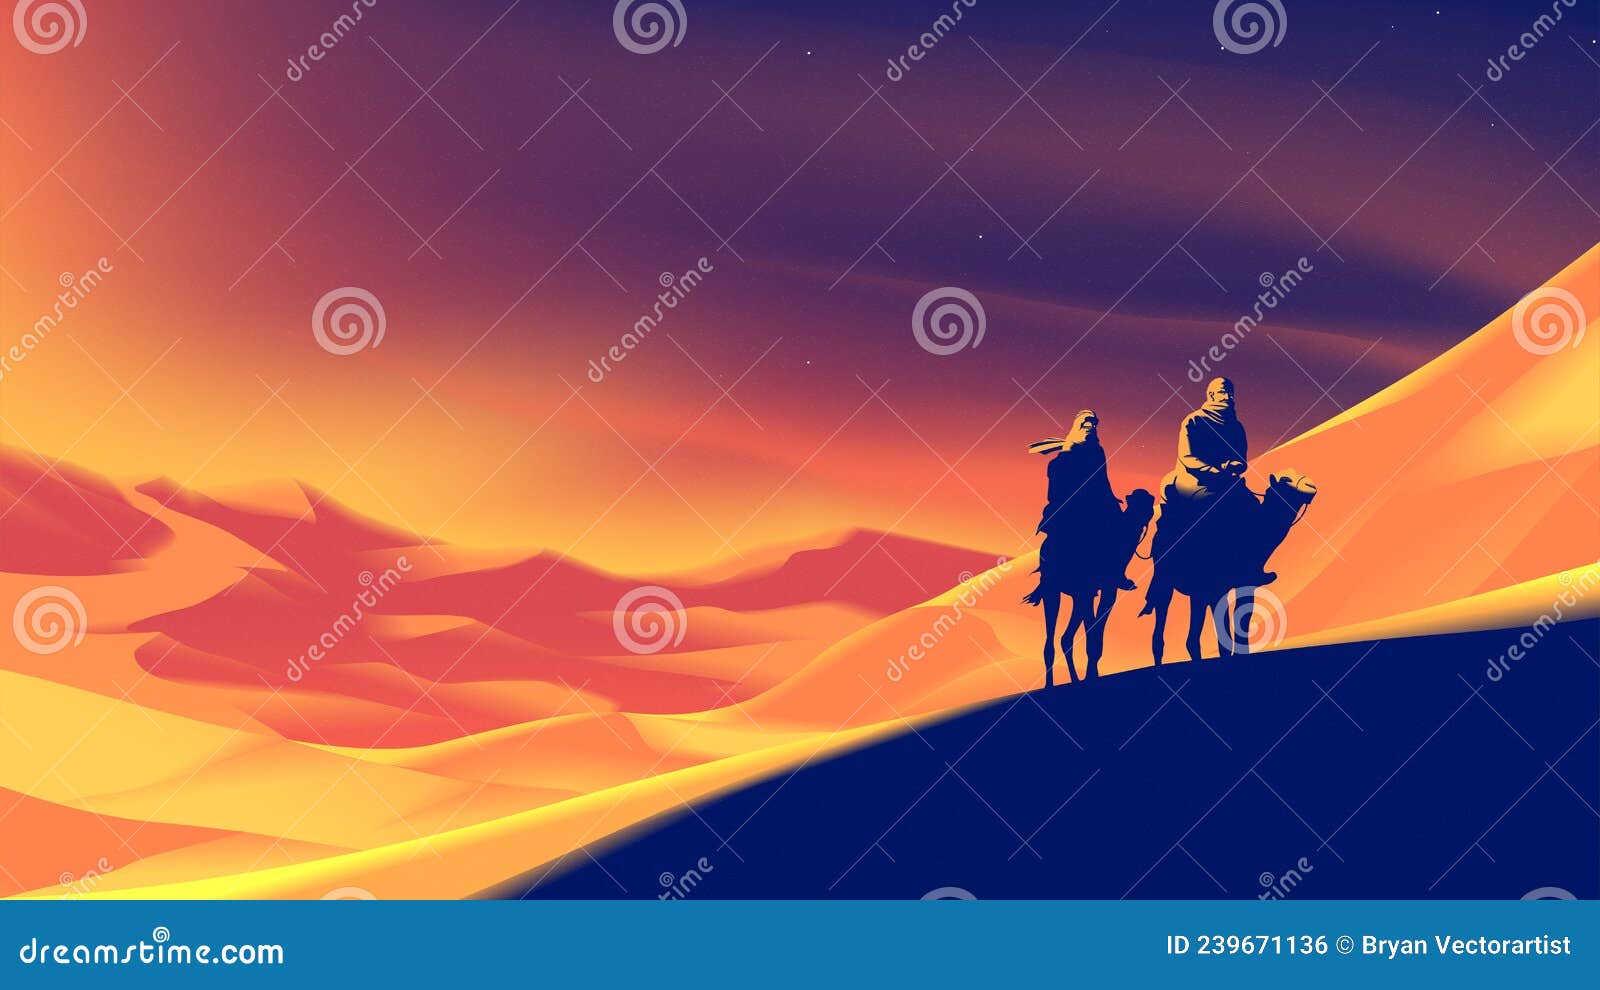 a nomad is crossing a desert with a sunset vibe